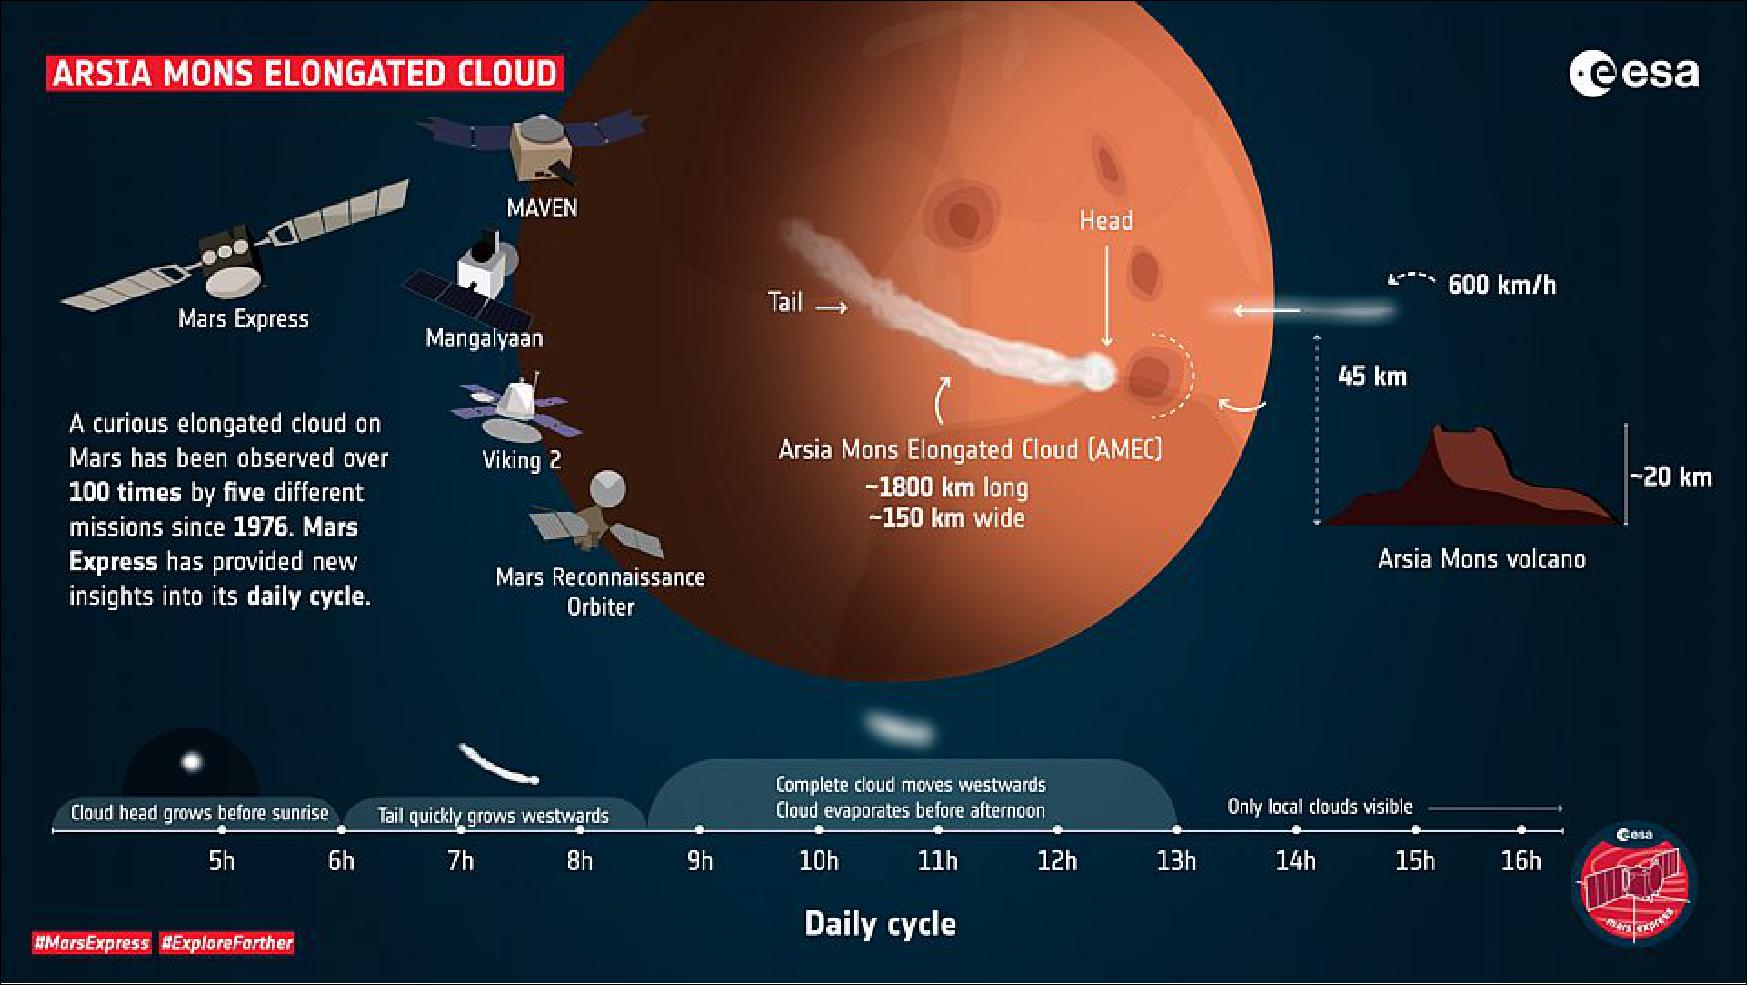 Figure 52: Profile of AMEC. When spring arrives in southern Mars, a cloud of water ice emerges near the 20-kilometer-tall Arsia Mons volcano, rapidly stretching out for many hundreds of kilometers before fading away in a matter of hours. A detailed long-term study reveals the daily and seasonal behavior of this cloud, using new observations from the Visual Monitoring Camera on ESA’s Mars Express, along with data from other Mars orbiters (image credit: ESA)